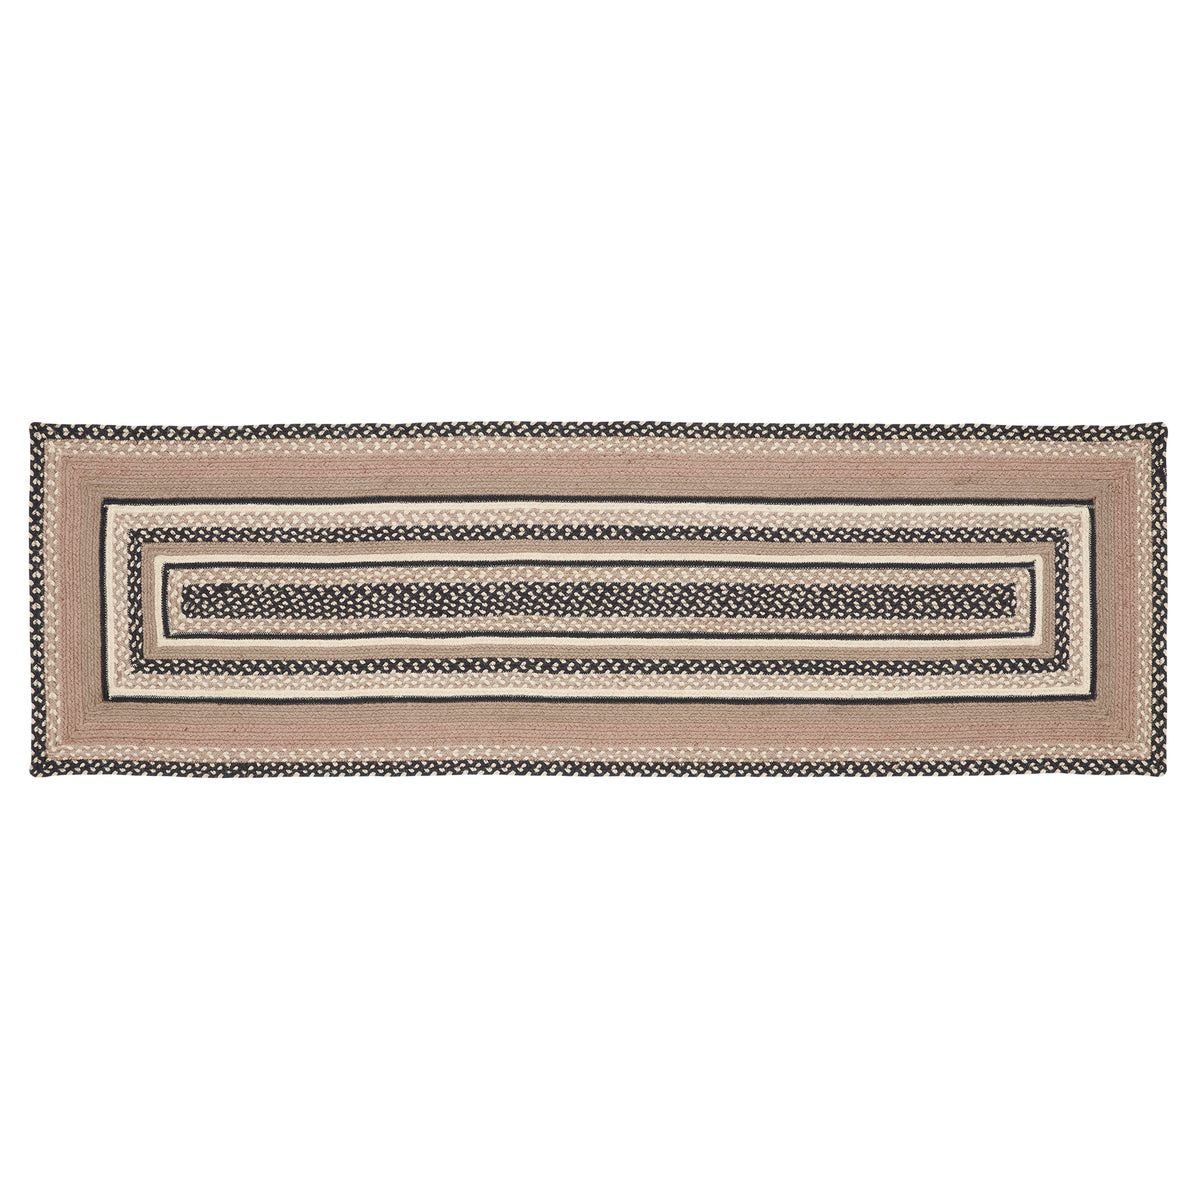 April & Olive Sawyer Mill Charcoal Creme Jute Rug/Runner Rect w/ Pad 24x78 By VHC Brands